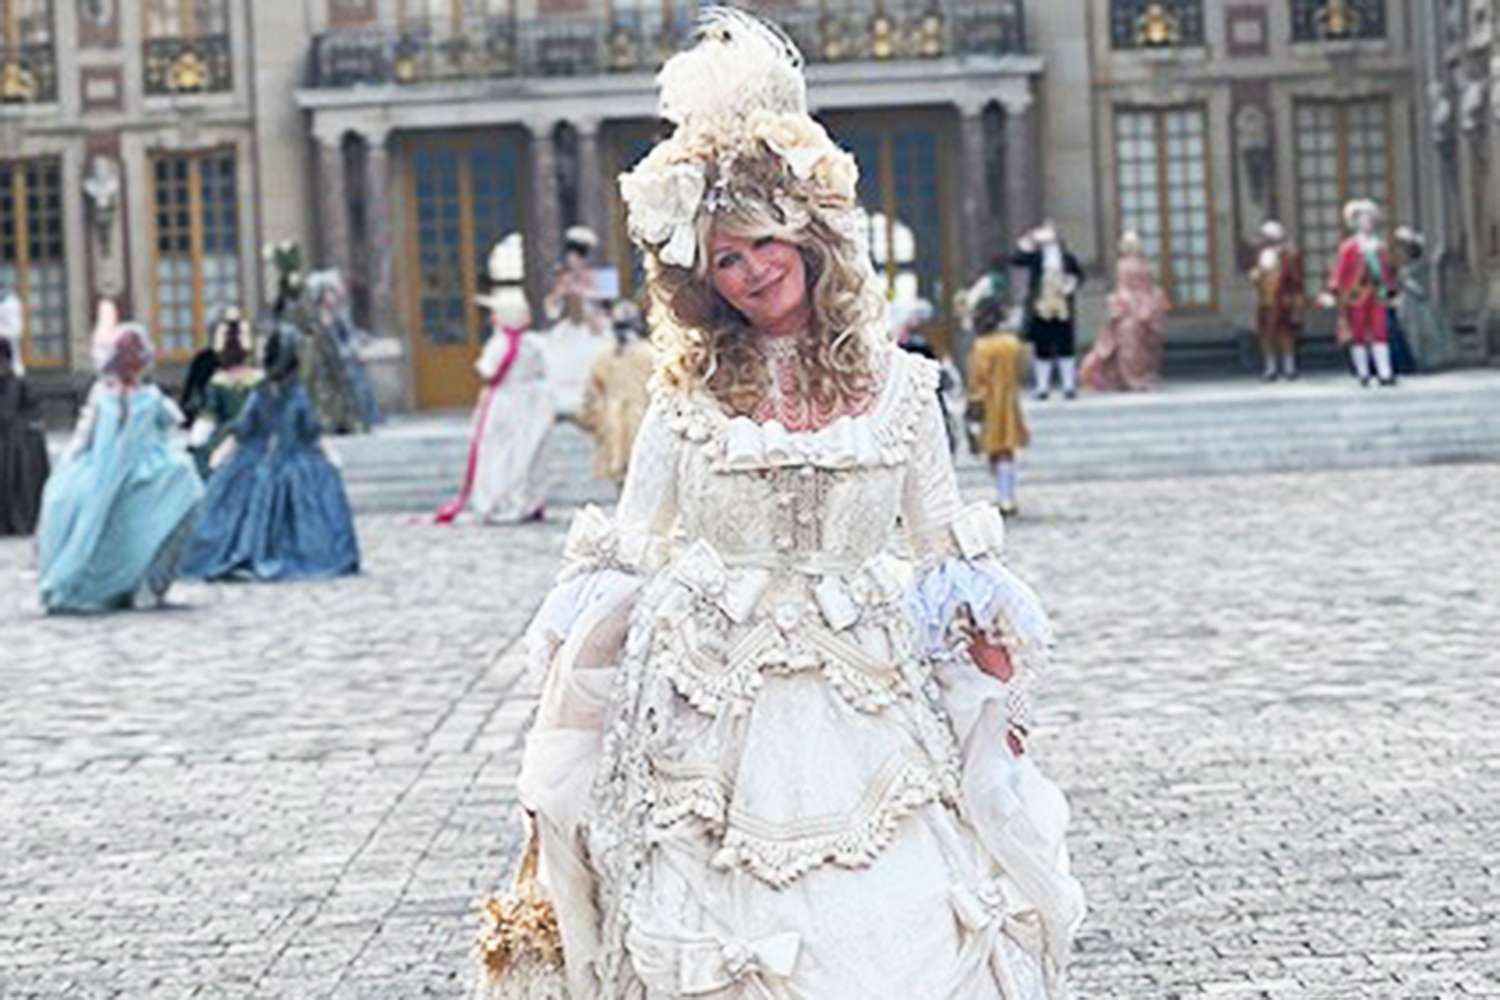 Sandra Lee Shows Off Semi-Homemade Marie Antoinette Dress That Took 10 Hours to Craft for Party at Versailles